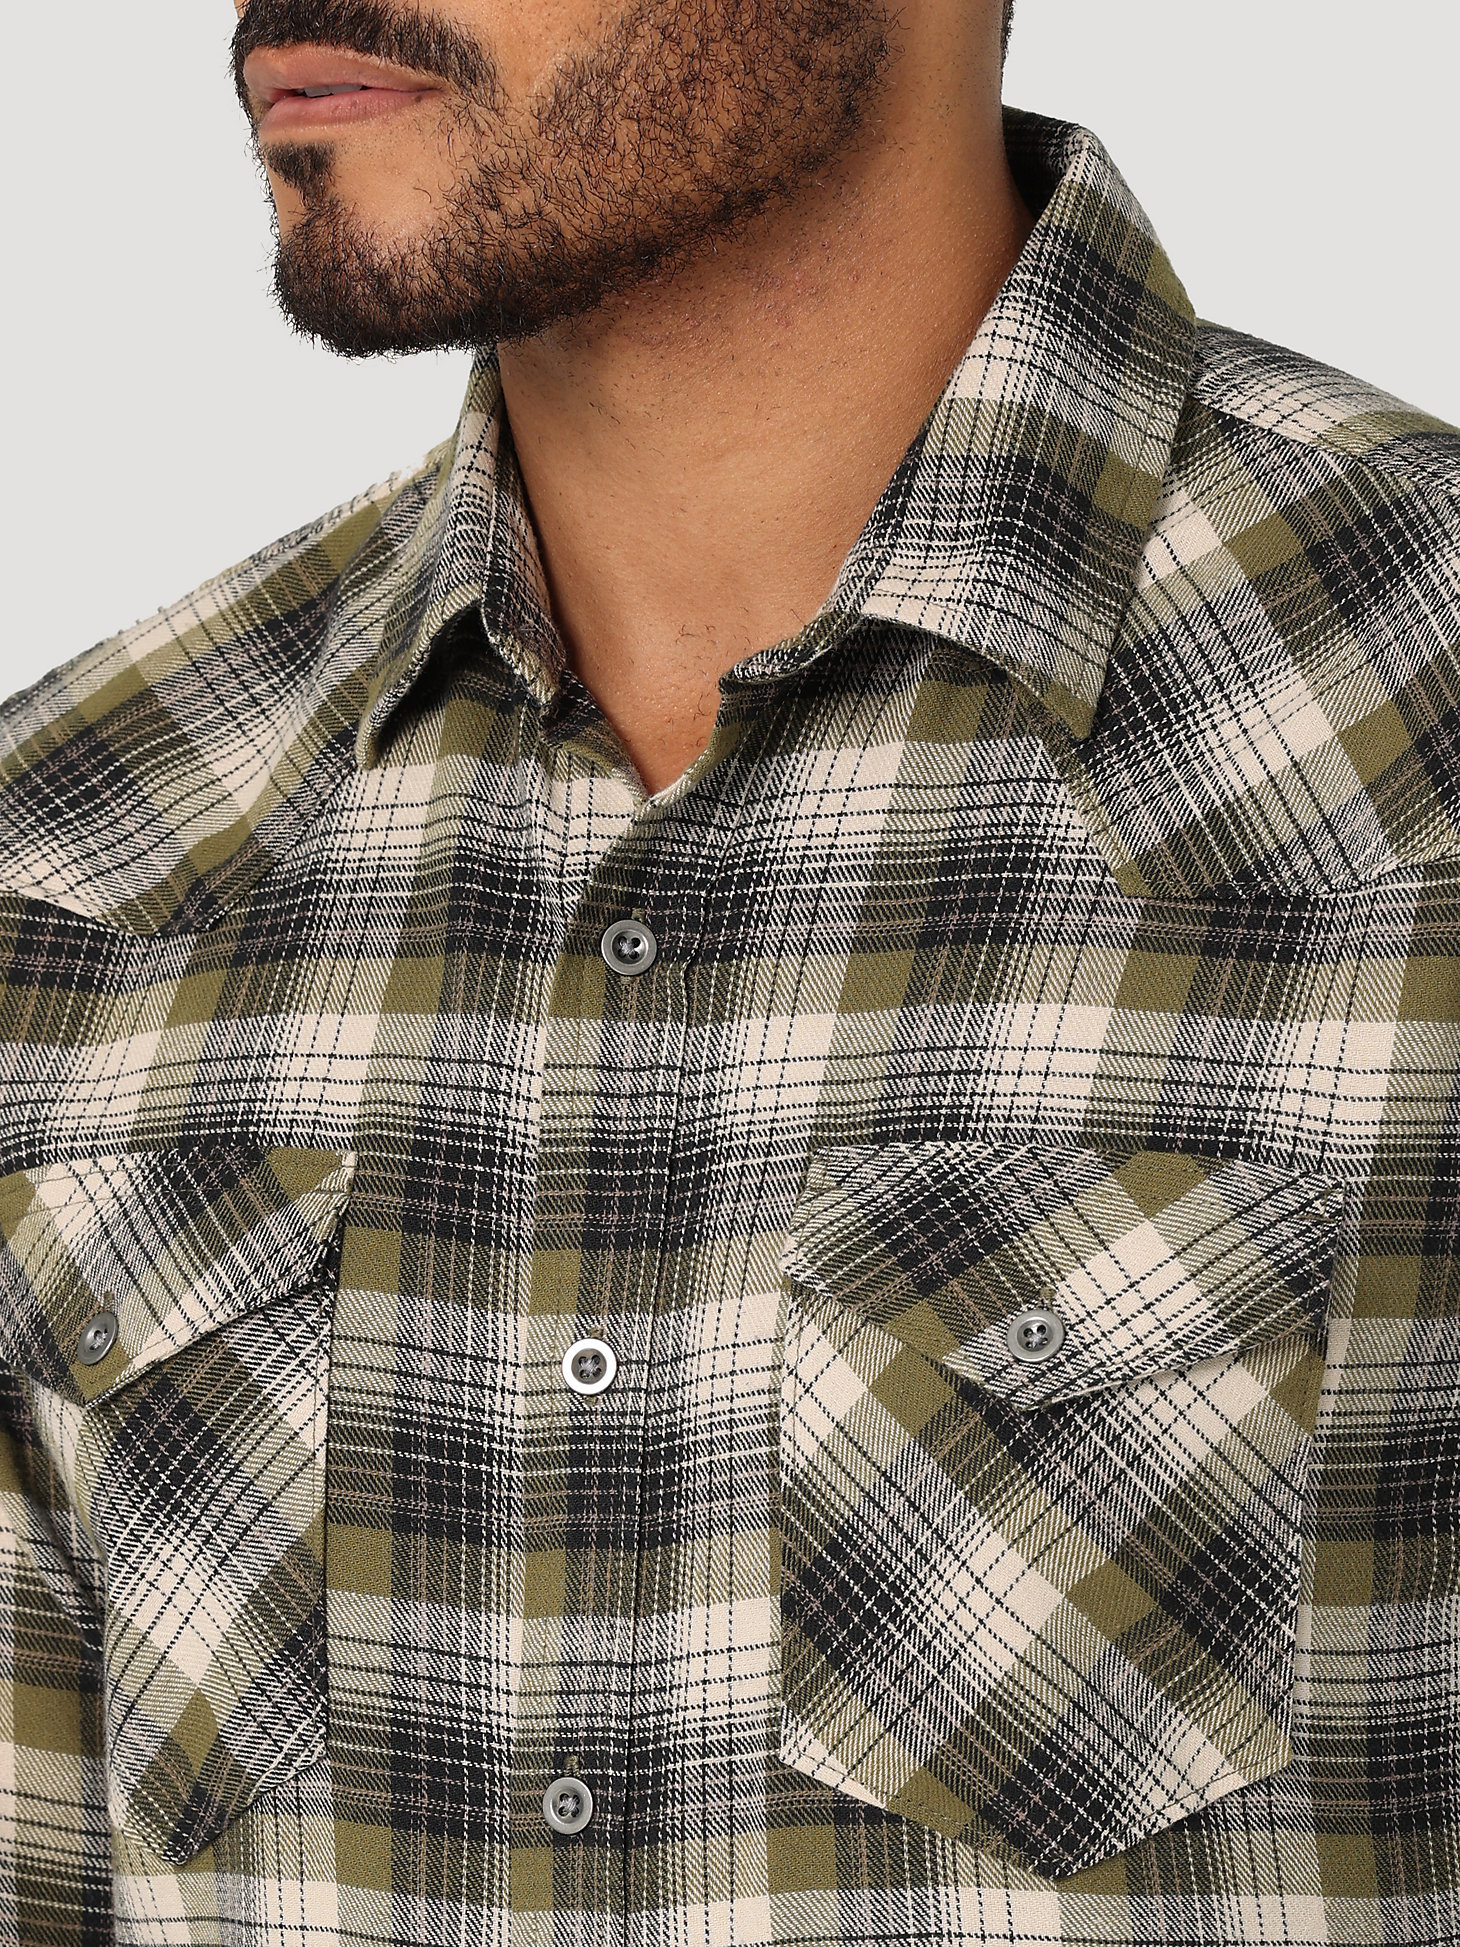 Men's Cloud Flannel™ Free To Stretch™ Shirt in Capulet Olive alternative view 2